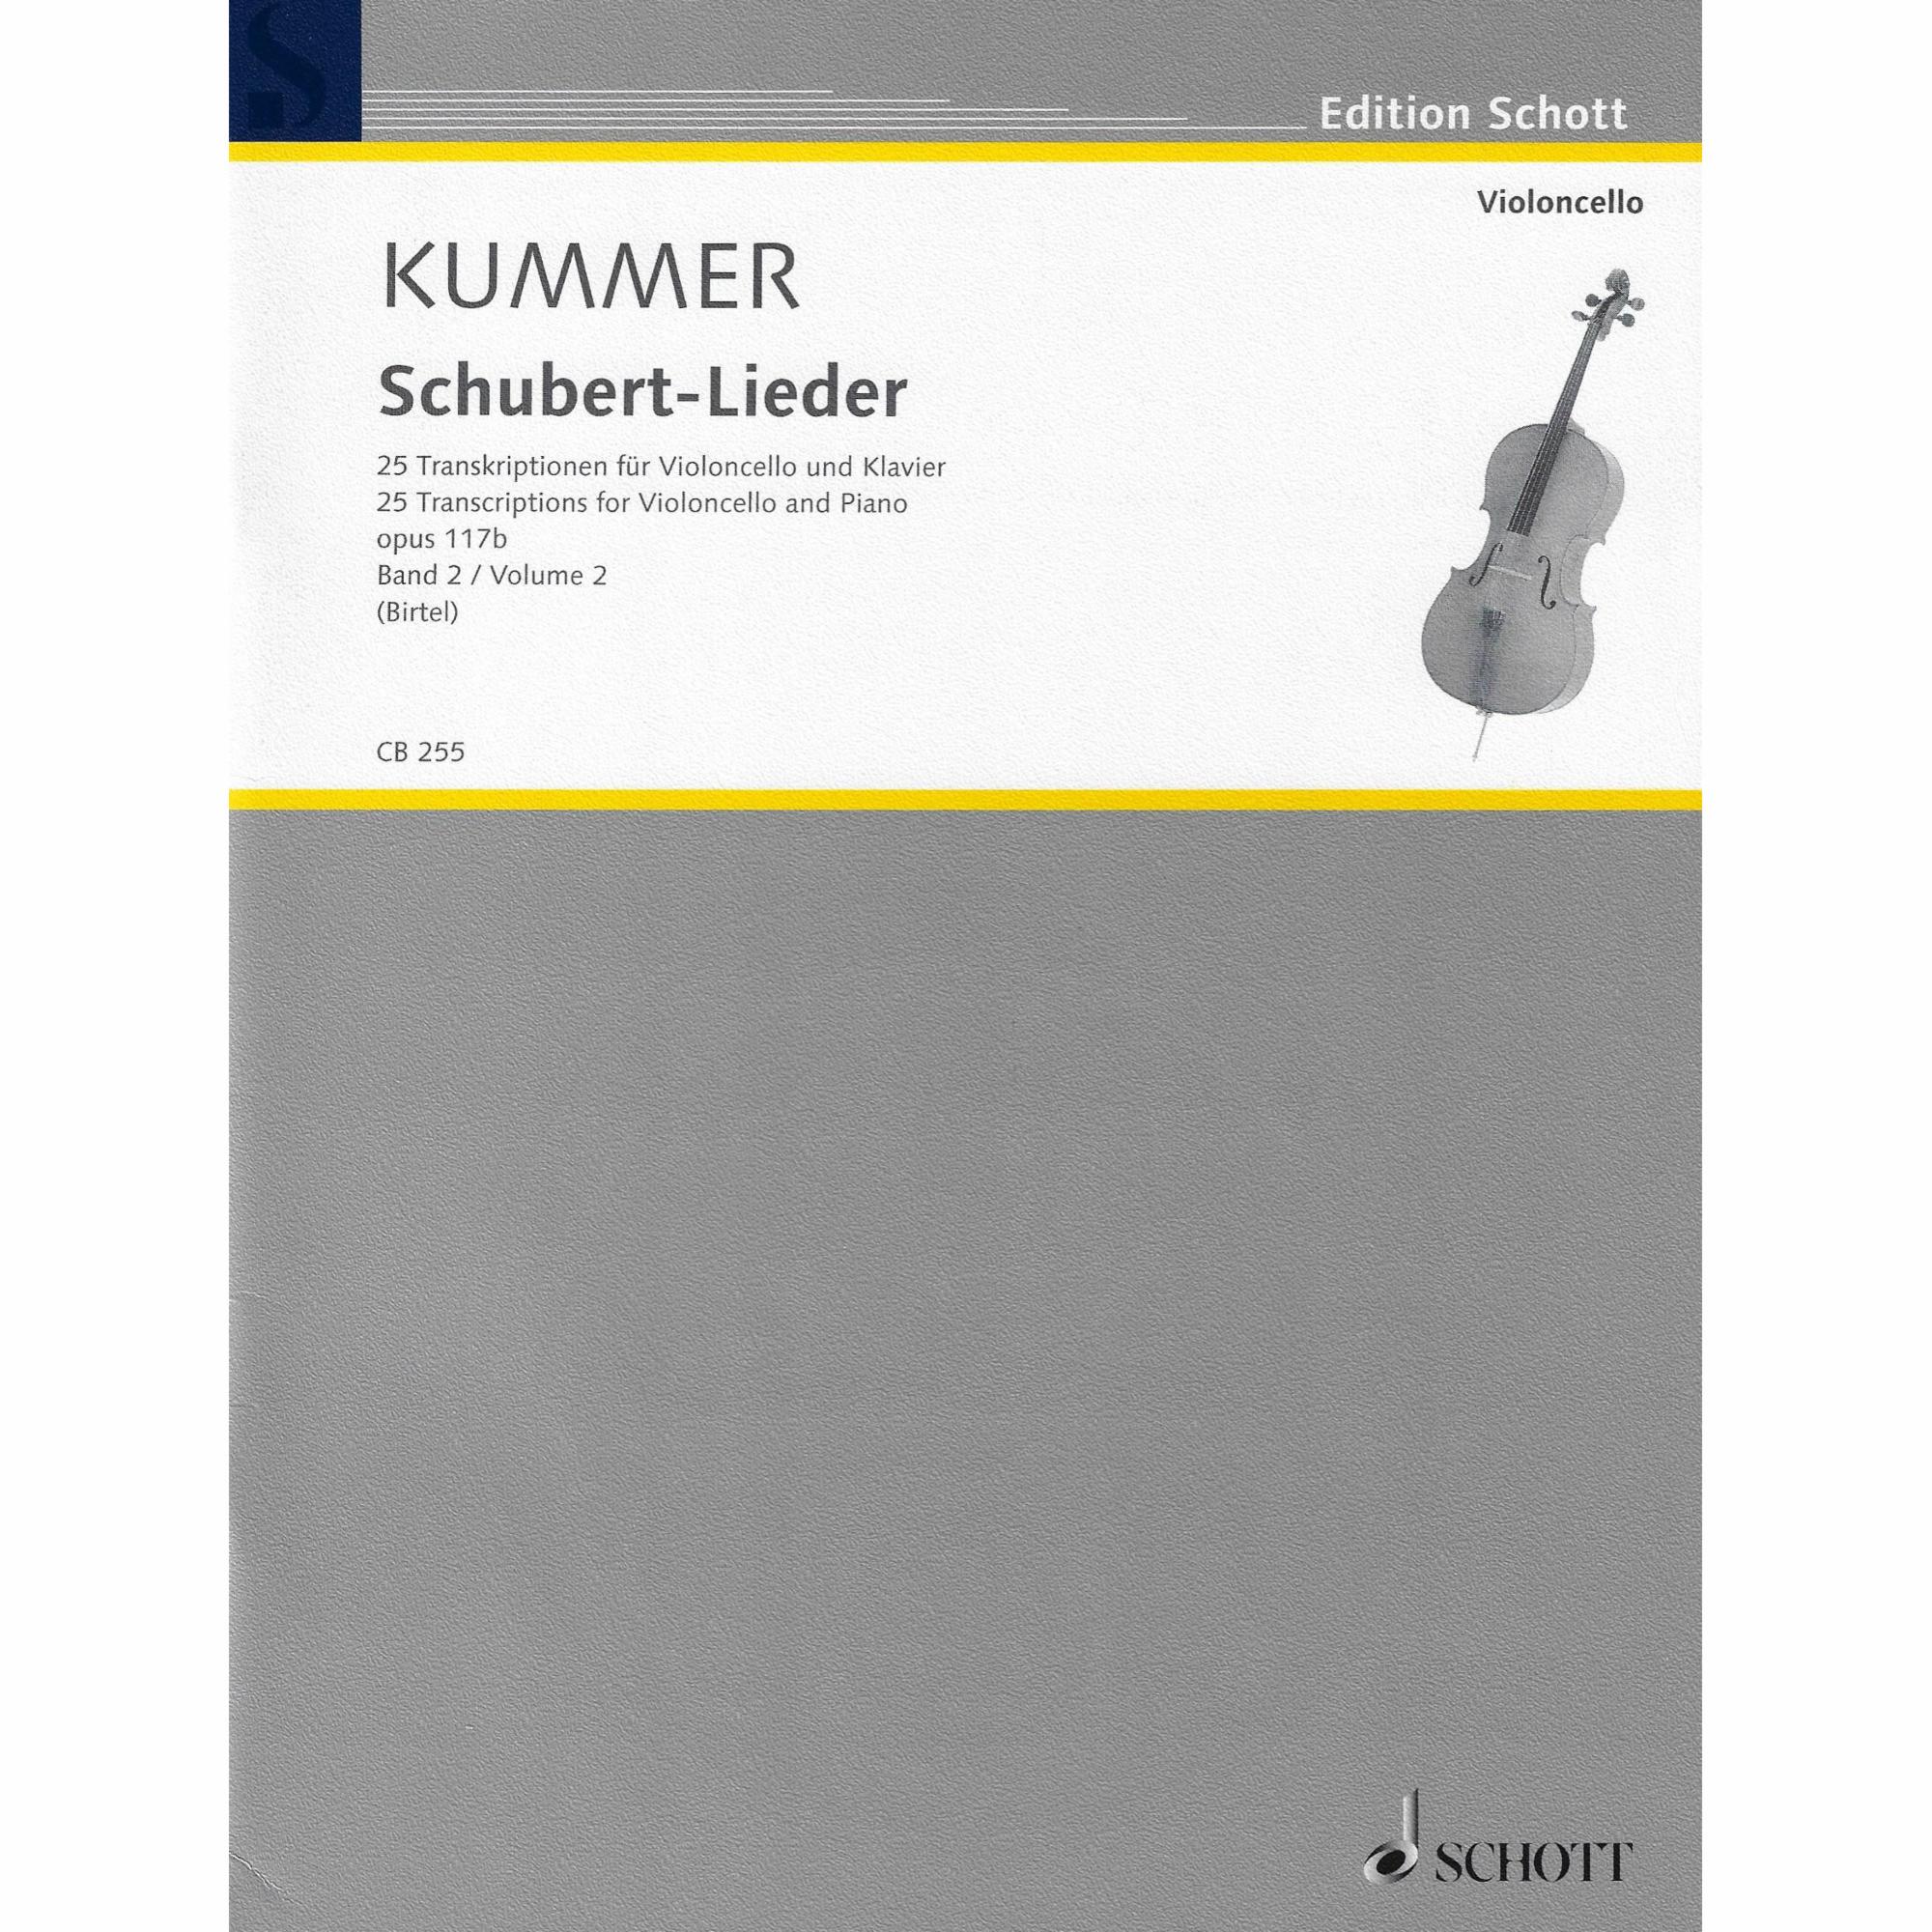 Schubert-Lieder for Cello and Piano